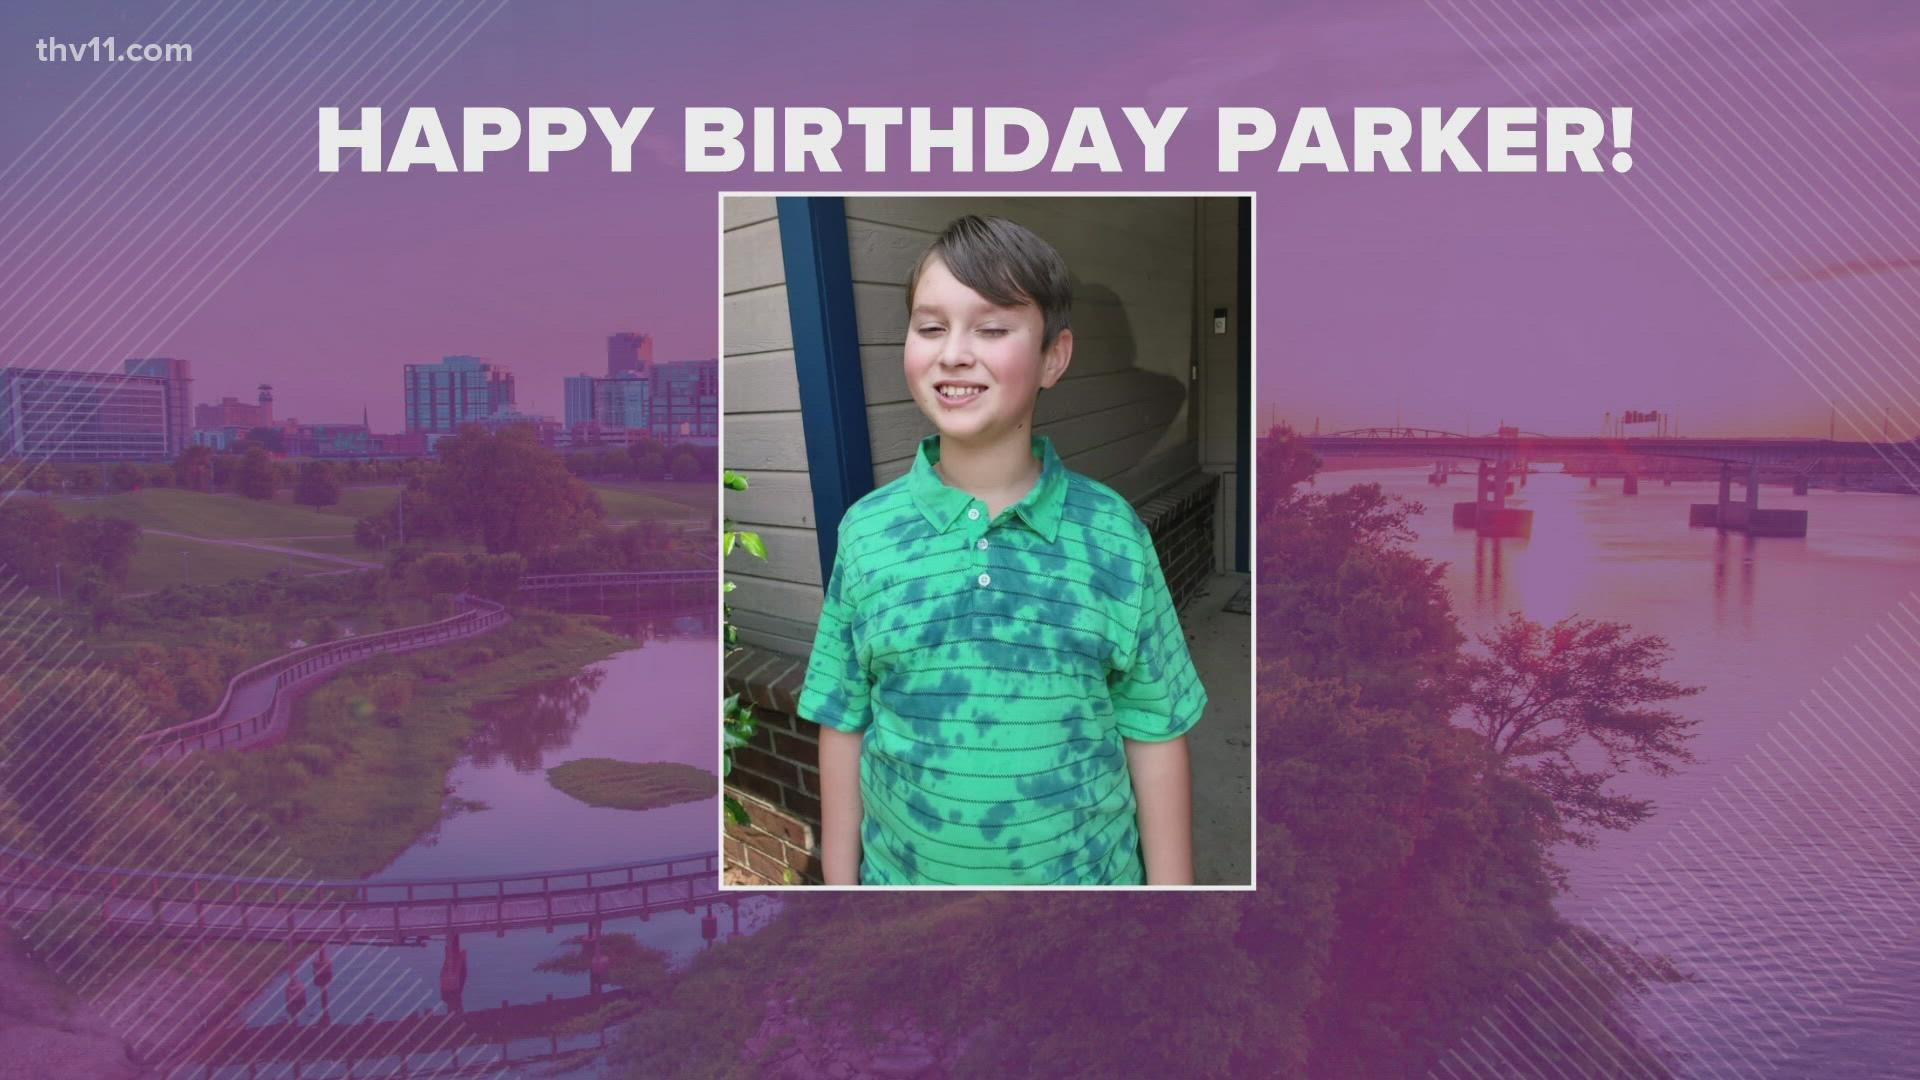 9-year-old Parker evacuated Louisiana and will have to spend his birthday in Arkansas. Big Rock Fun Park in Little Rock made a donation to help him celebrate.